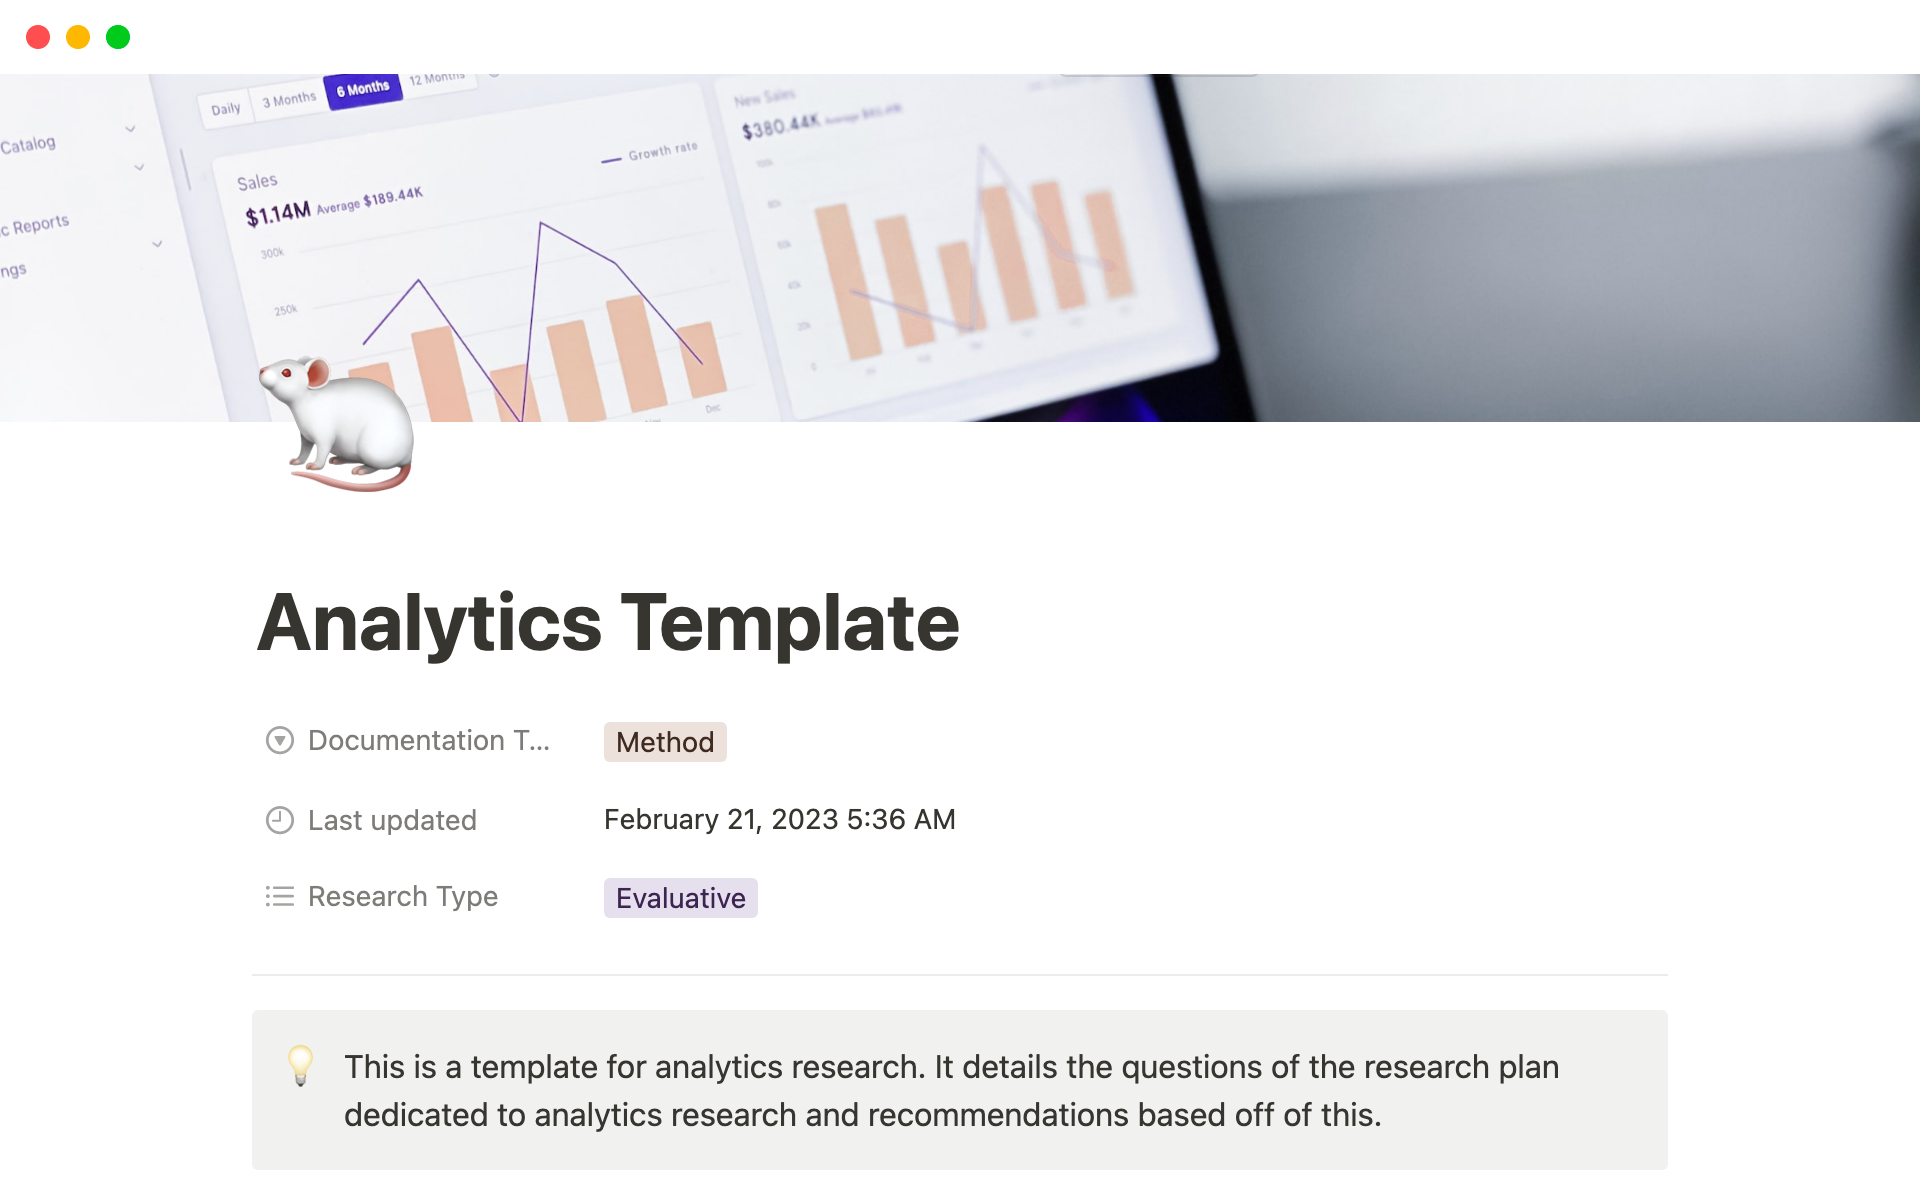 This is a template for analytics research. It details the questions of the research plan dedicated to analytics research and recommendations based off of this.